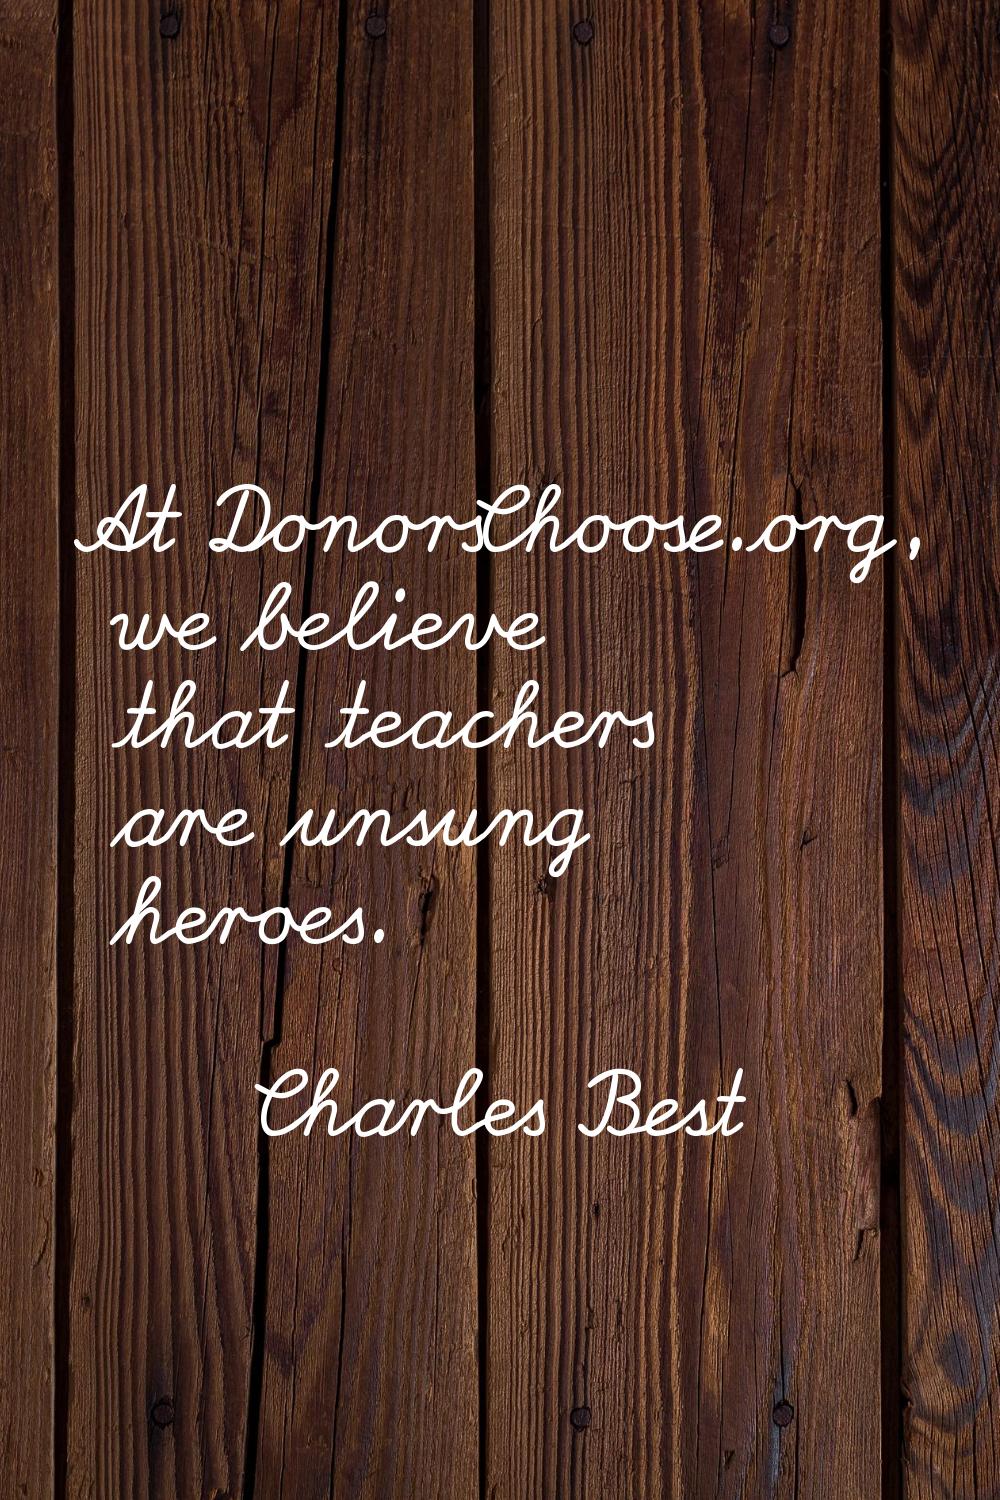 At DonorsChoose.org, we believe that teachers are unsung heroes.